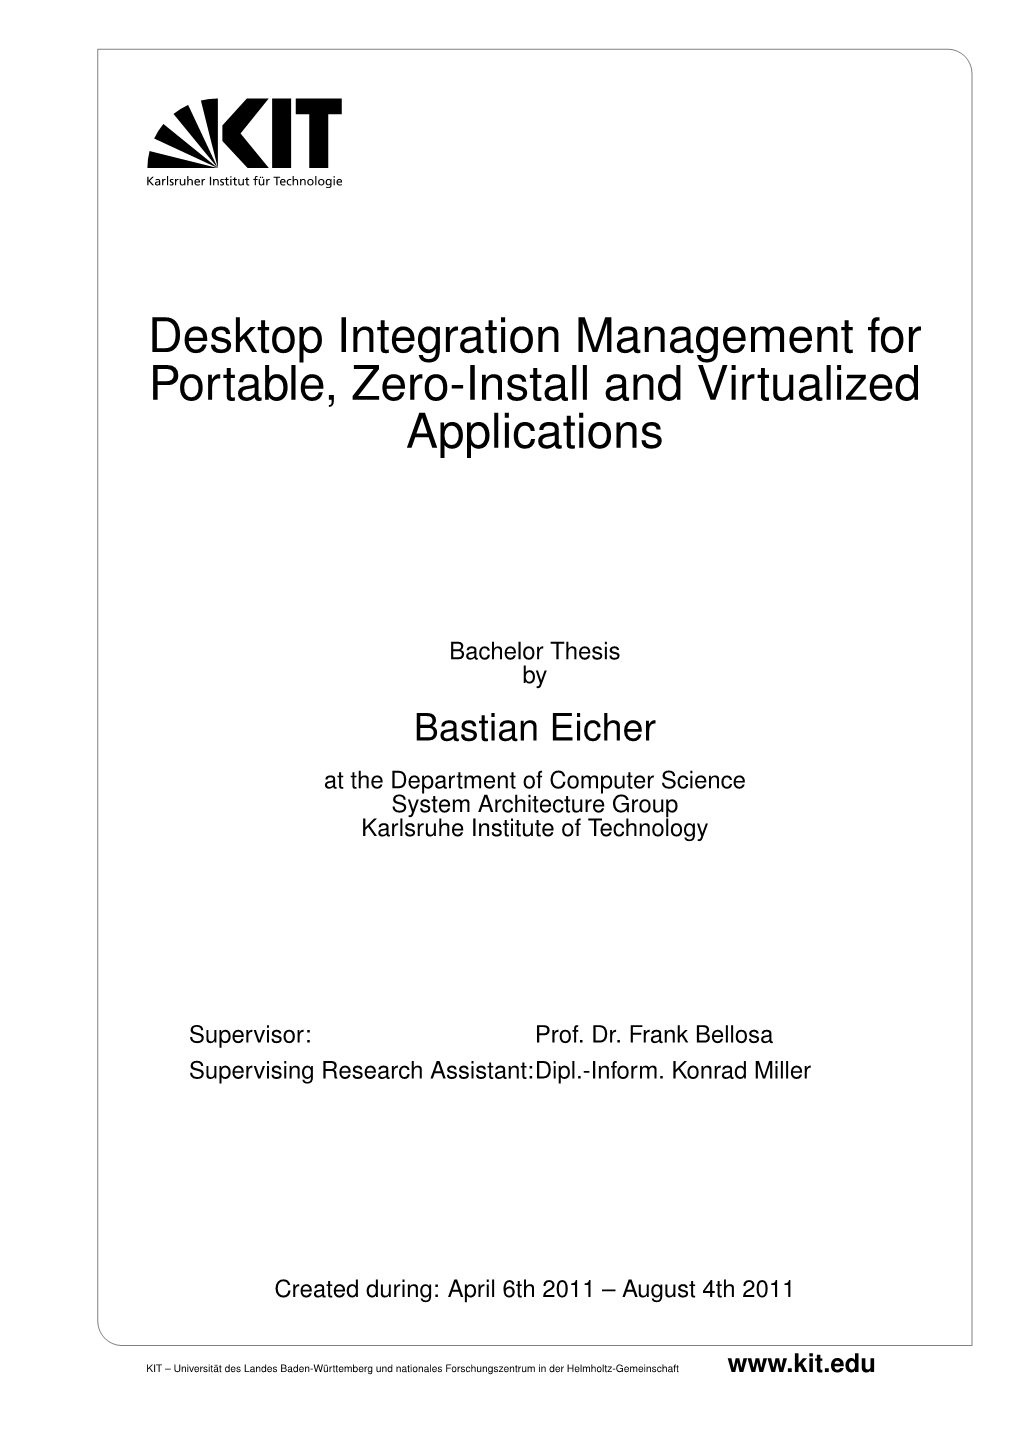 Desktop Integration Management for Portable, Zero-Install and Virtualized Applications